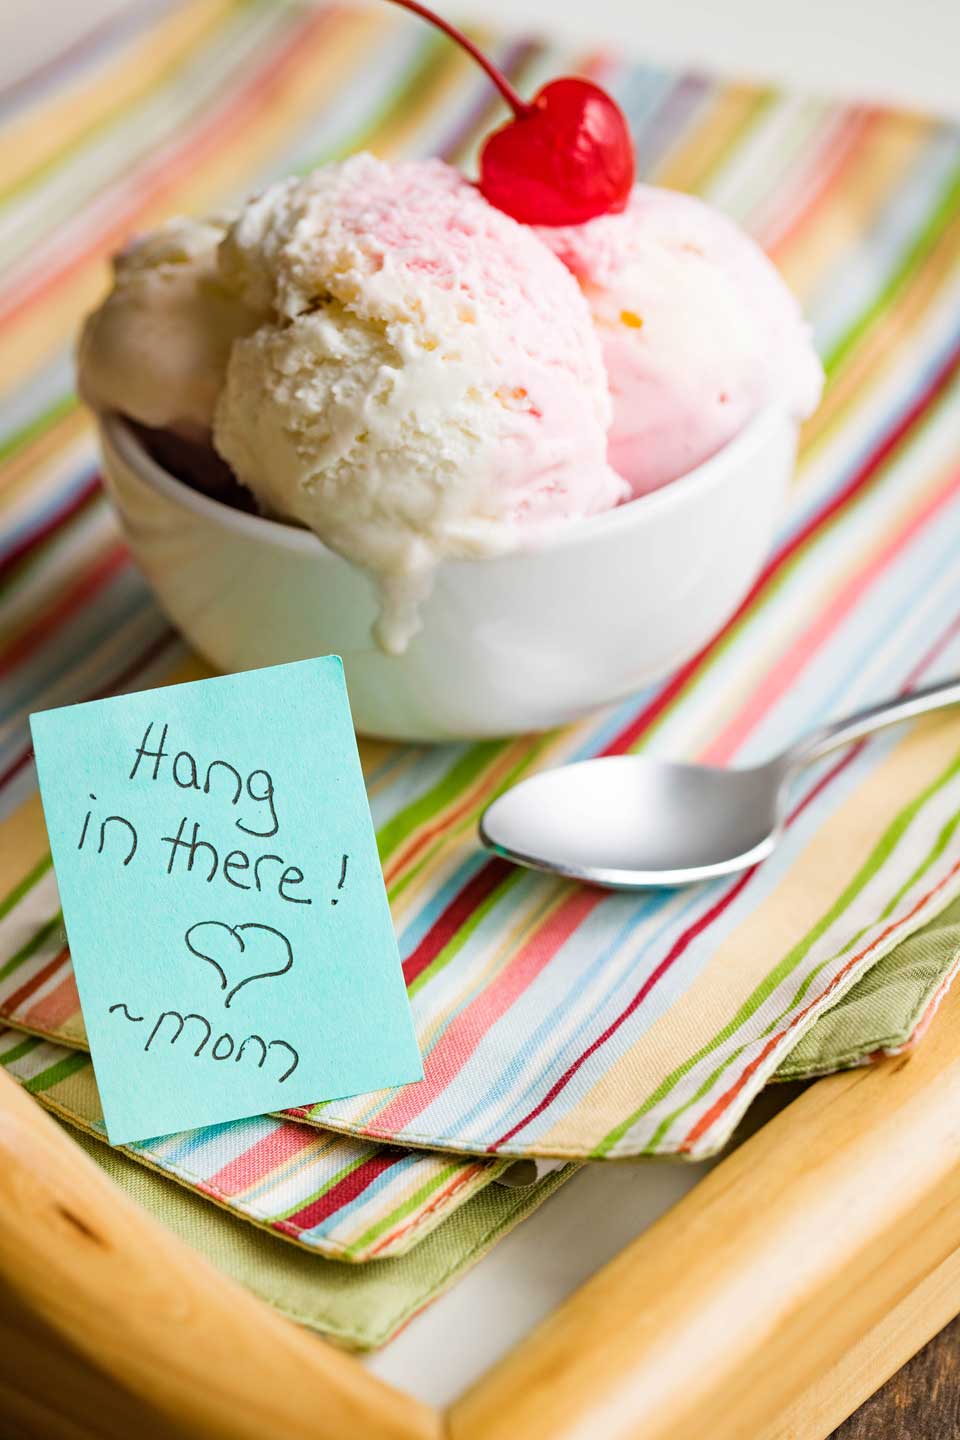 bowl of strawberry and vanilla ice cream with a note reading "Hang in there! ~Mom"